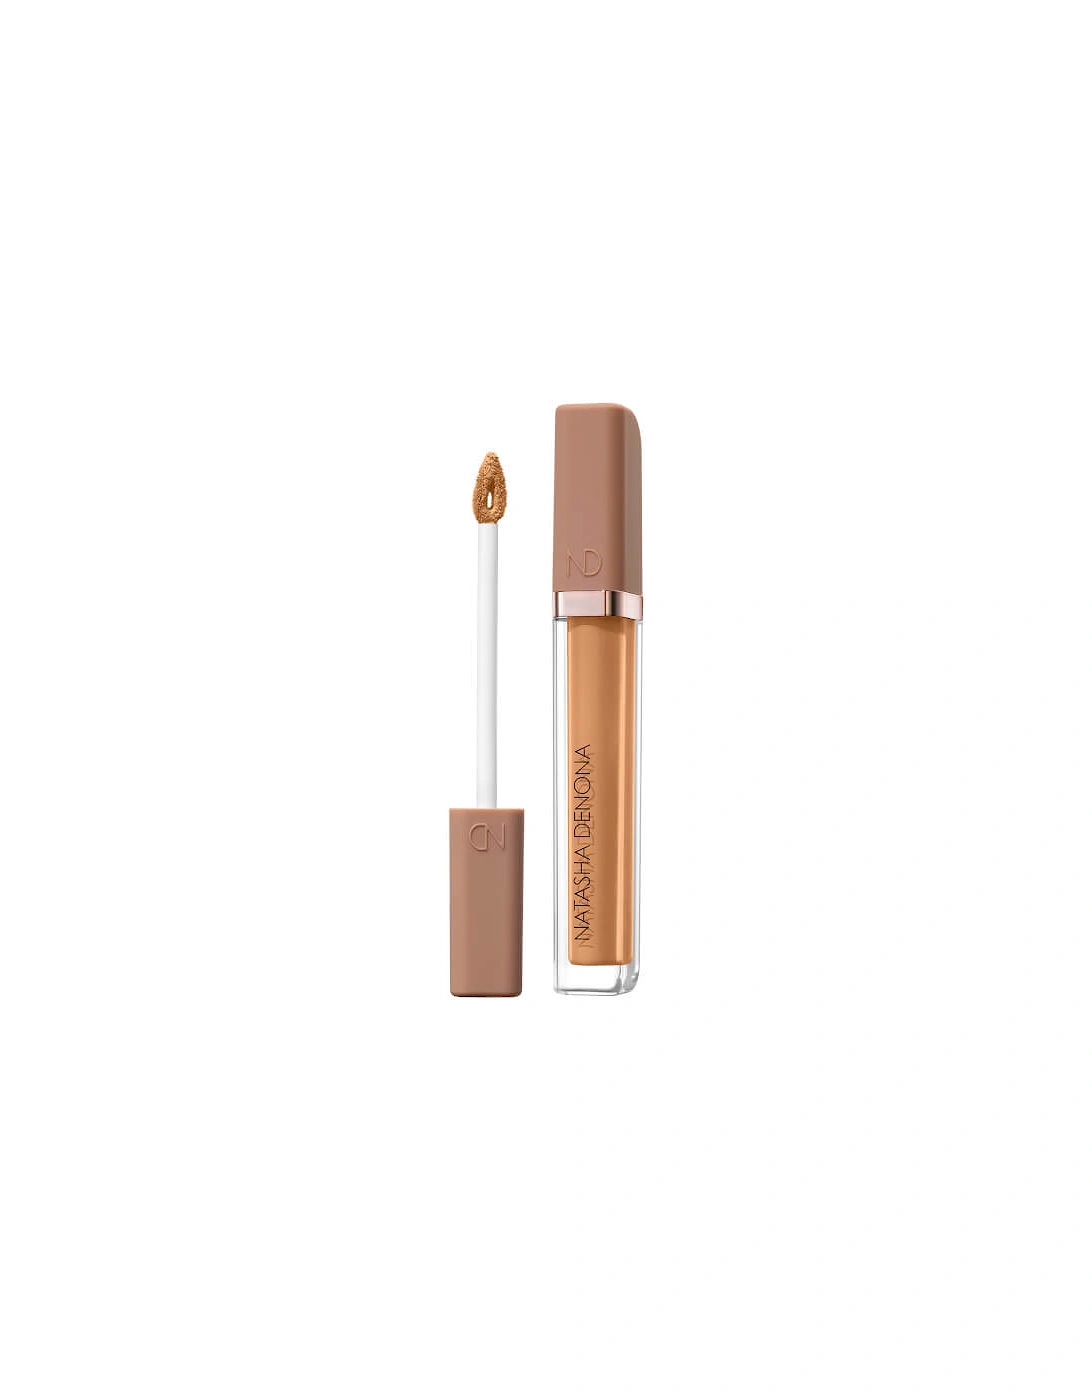 Hy-Glam Concealer - NY11, 2 of 1